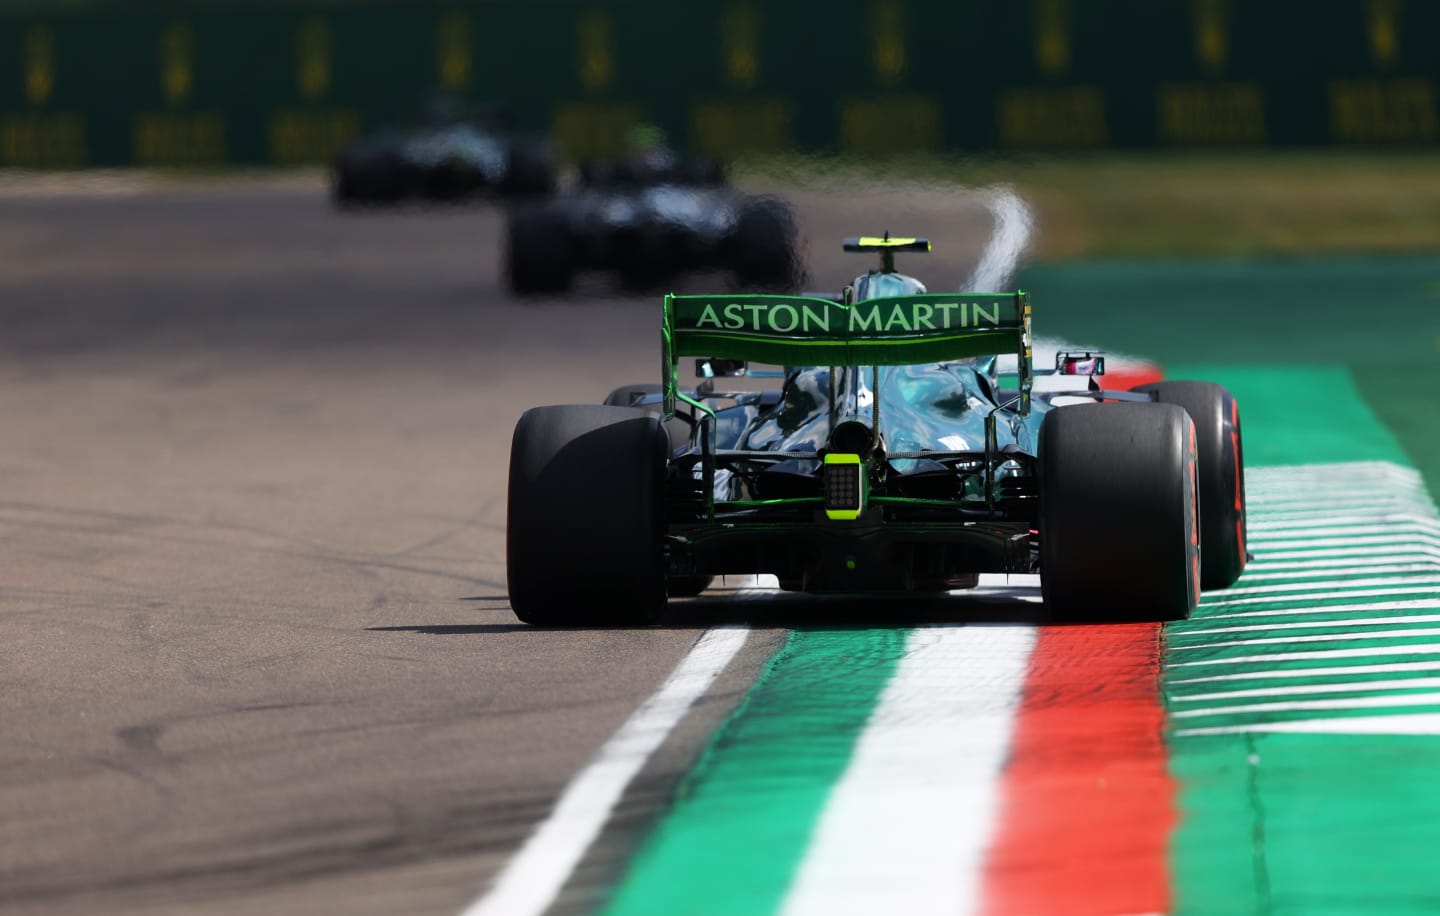 IMOLA, ITALY - APRIL 16: Sebastian Vettel of Germany driving the (5) Aston Martin AMR21 Mercedes on track during practice ahead of the F1 Grand Prix of Emilia Romagna at Autodromo Enzo e Dino Ferrari on April 16, 2021 in Imola, Italy. (Photo by Bryn Lennon/Getty Images)